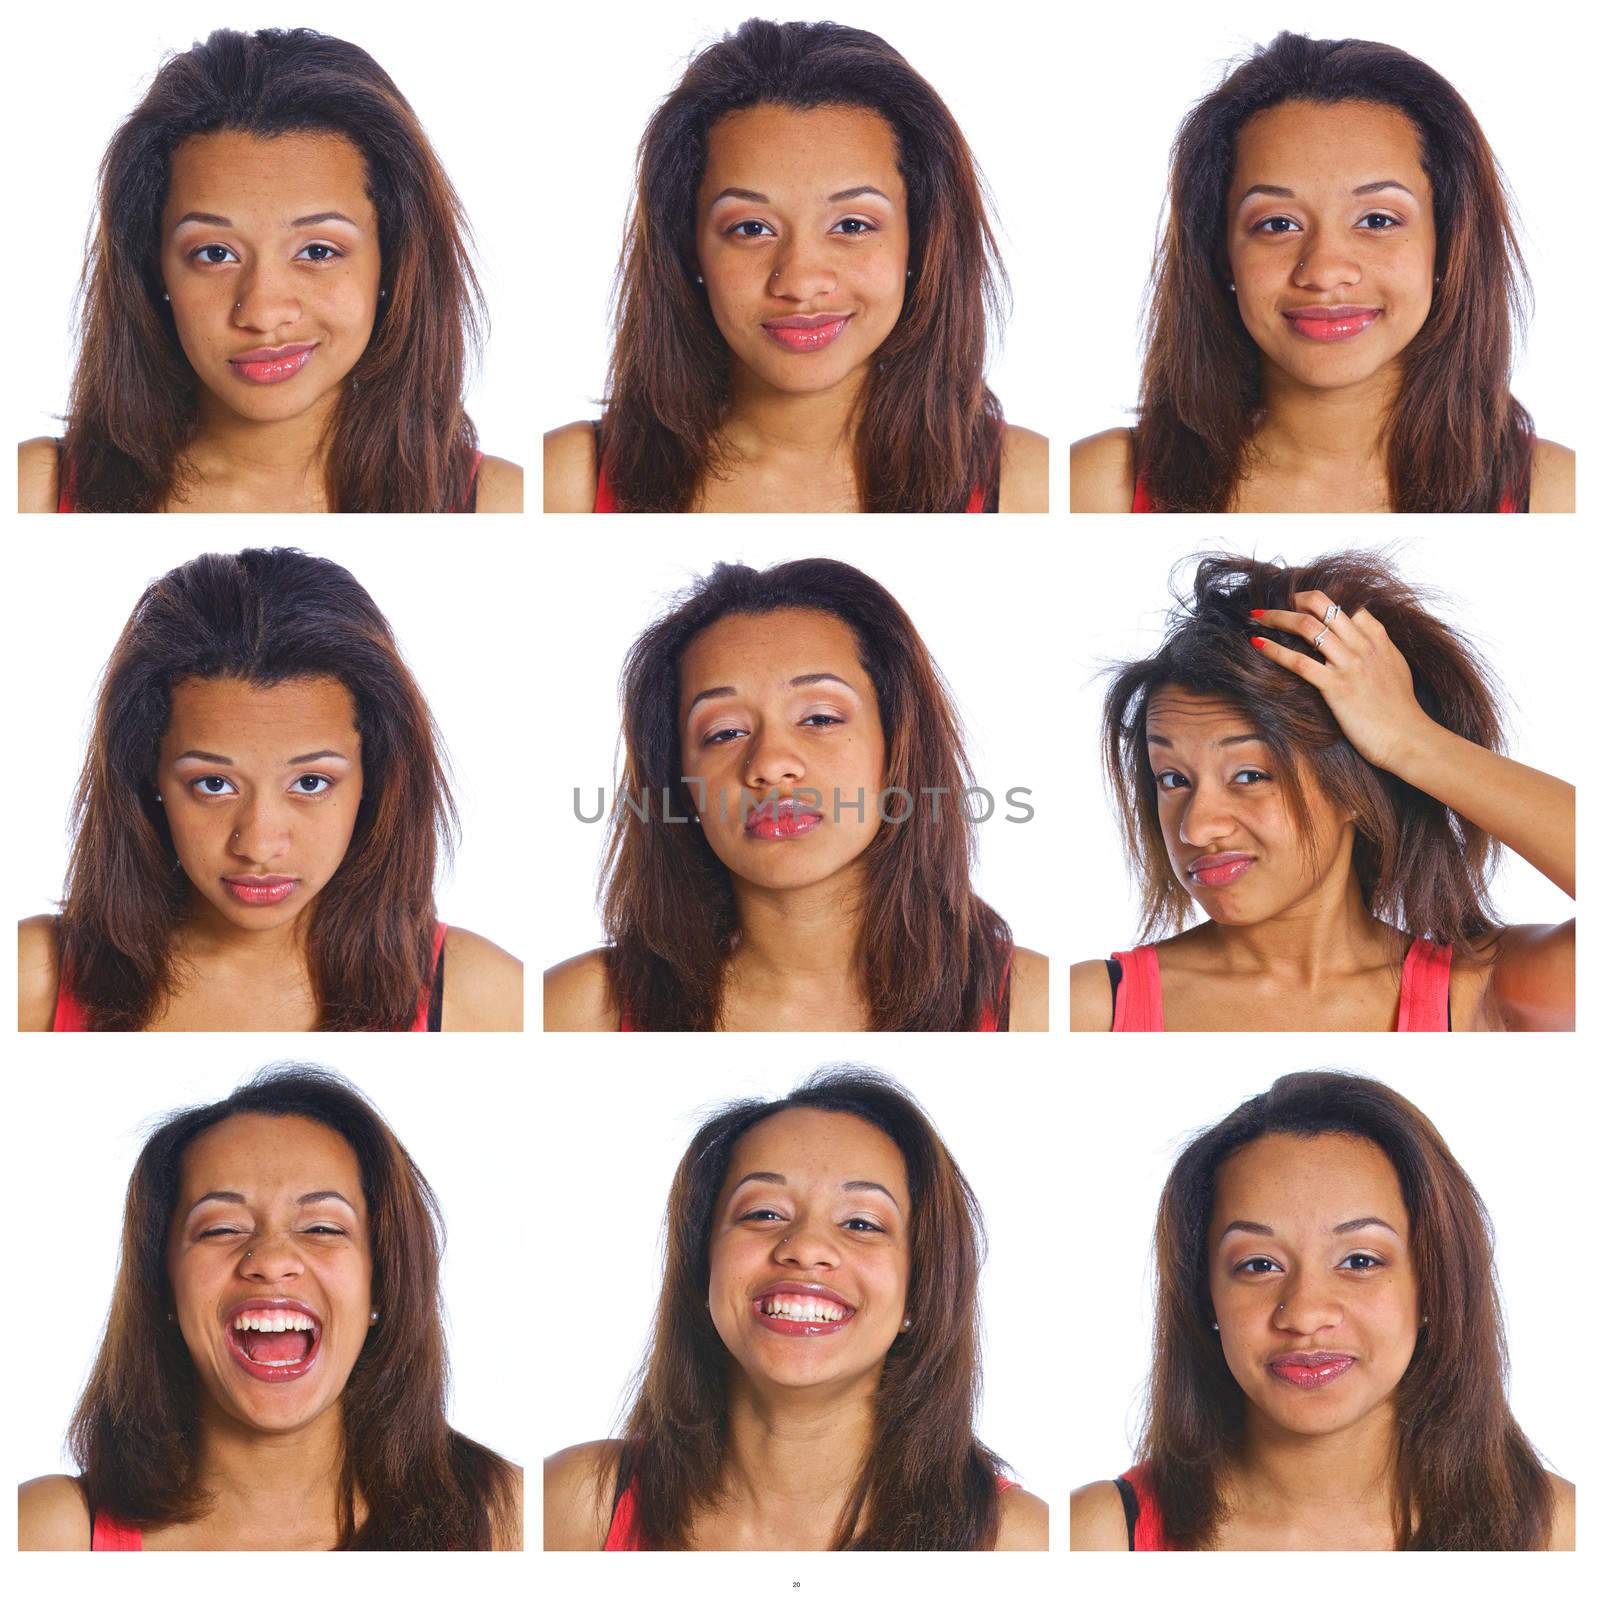 Collage of images portrait adorable young grimacing mulatto girl. Isolated white backround